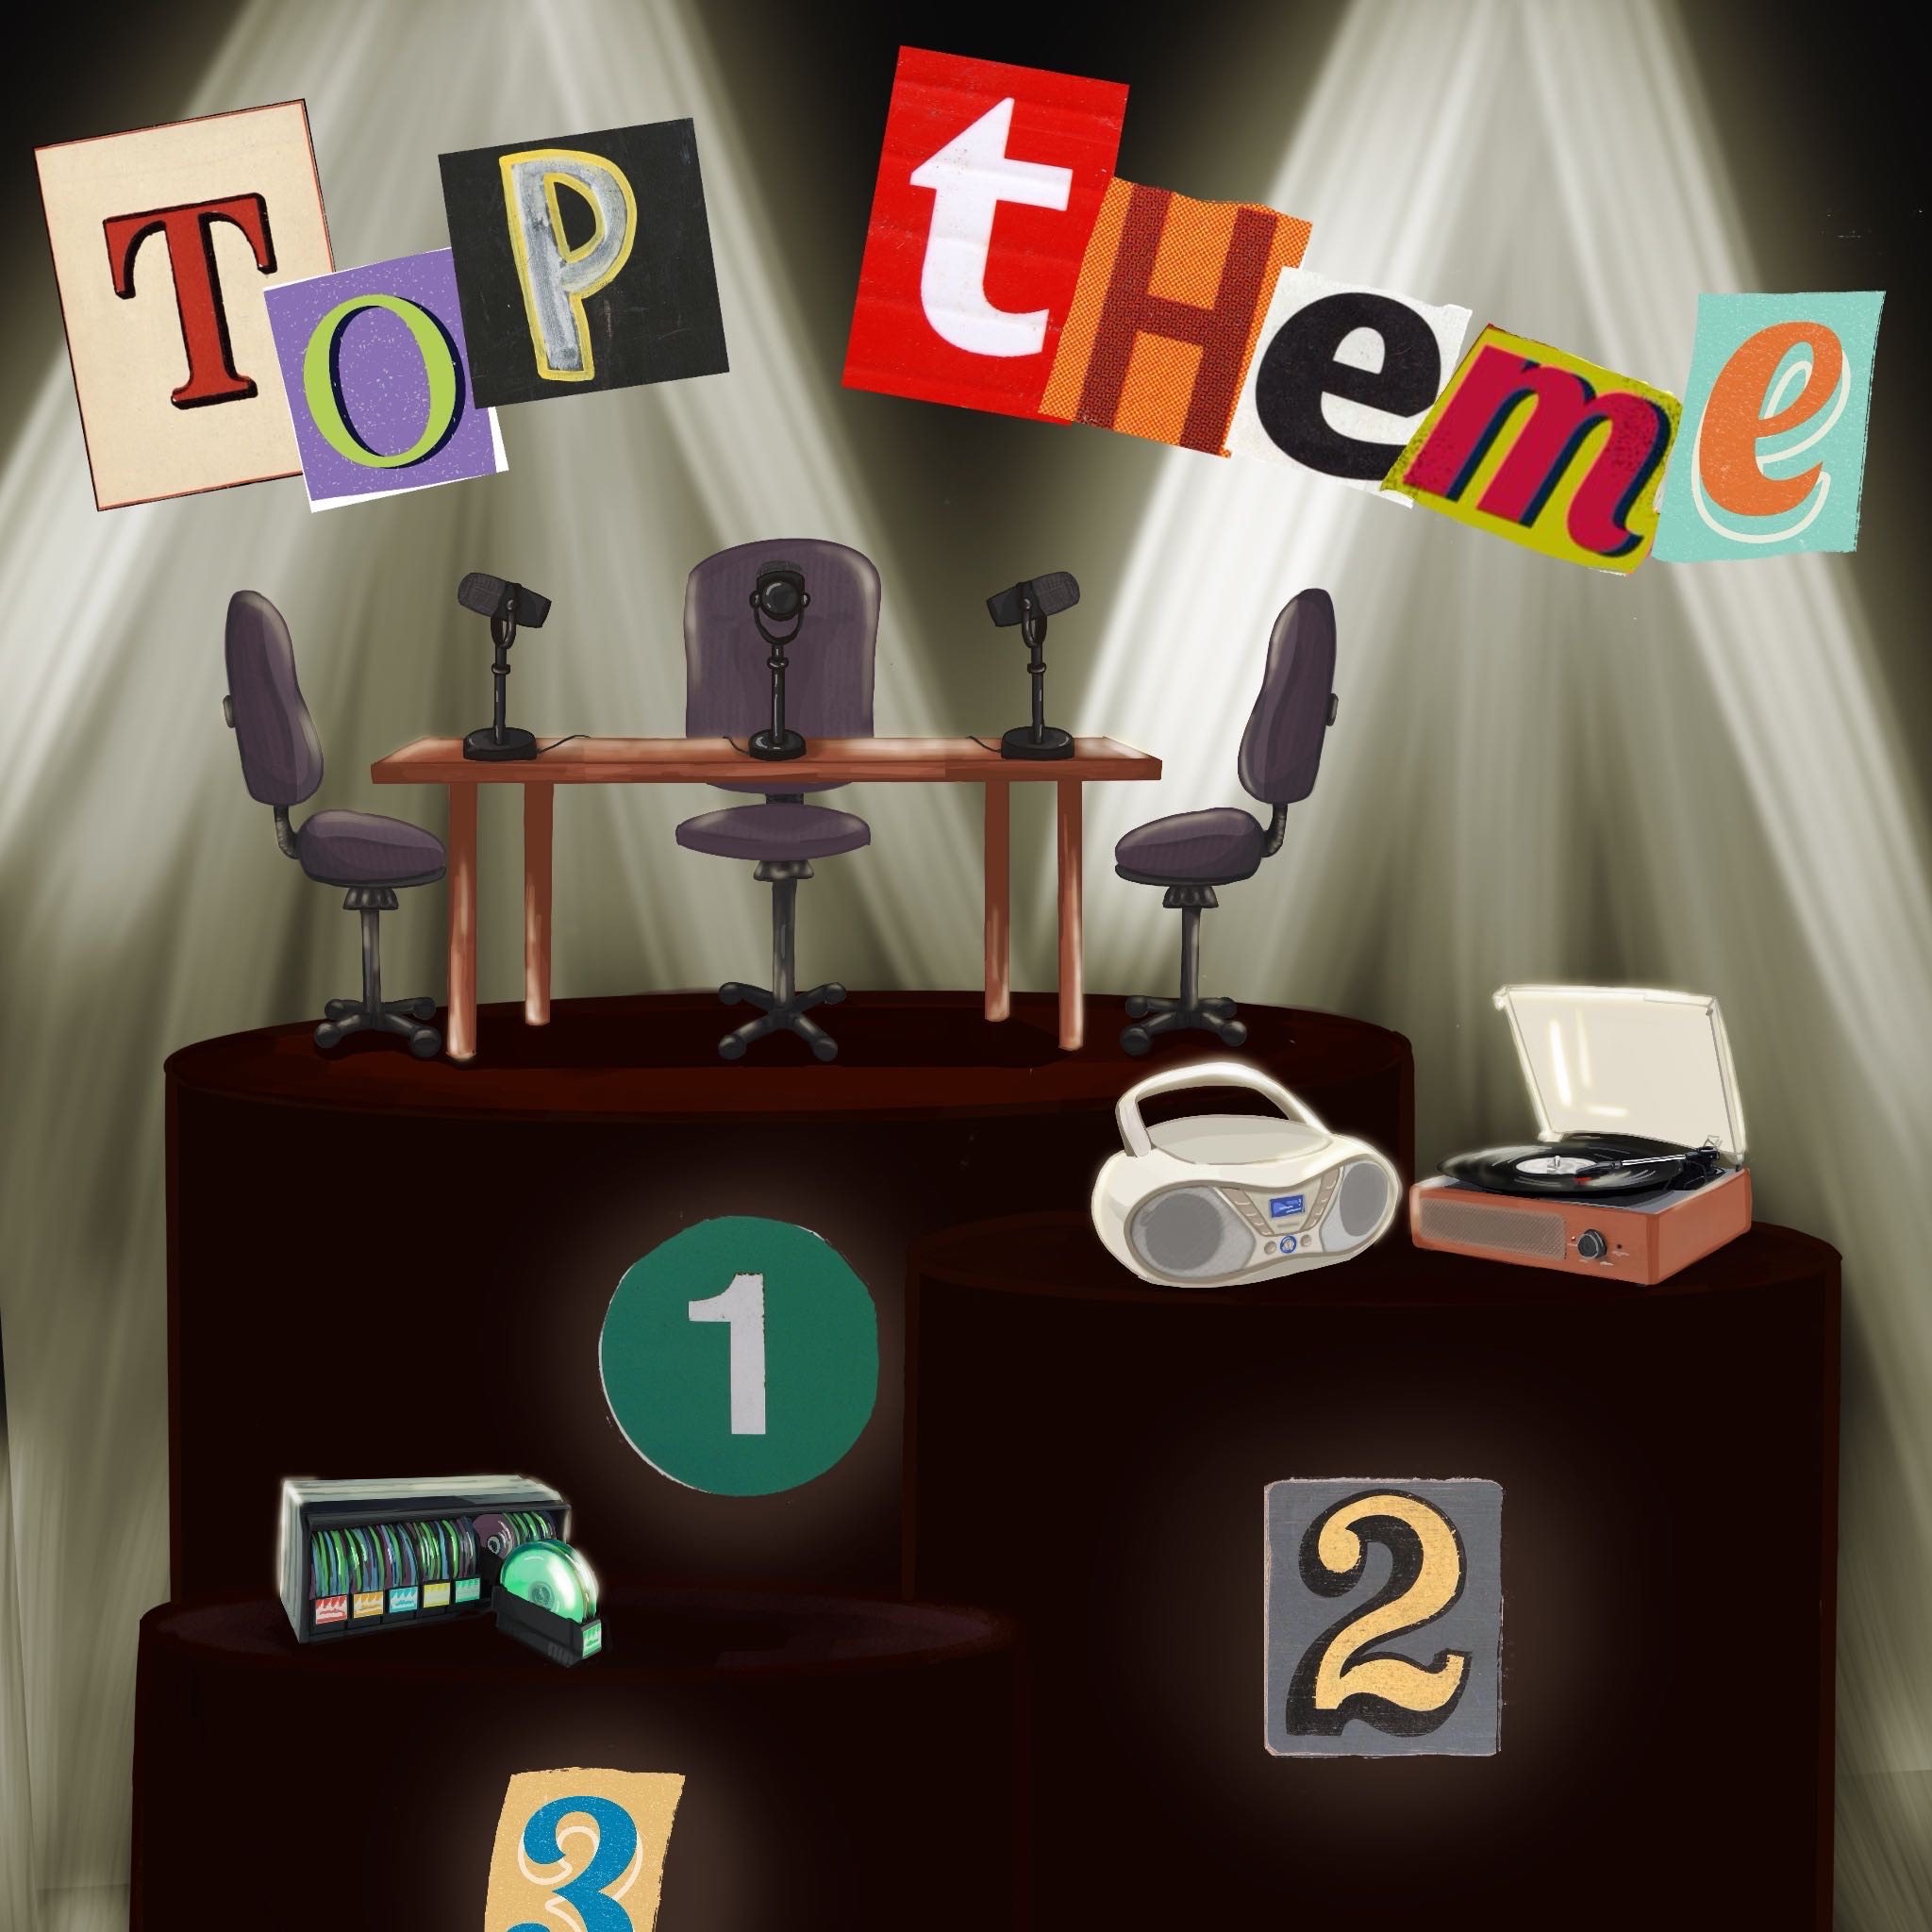 Artwork for Top theme